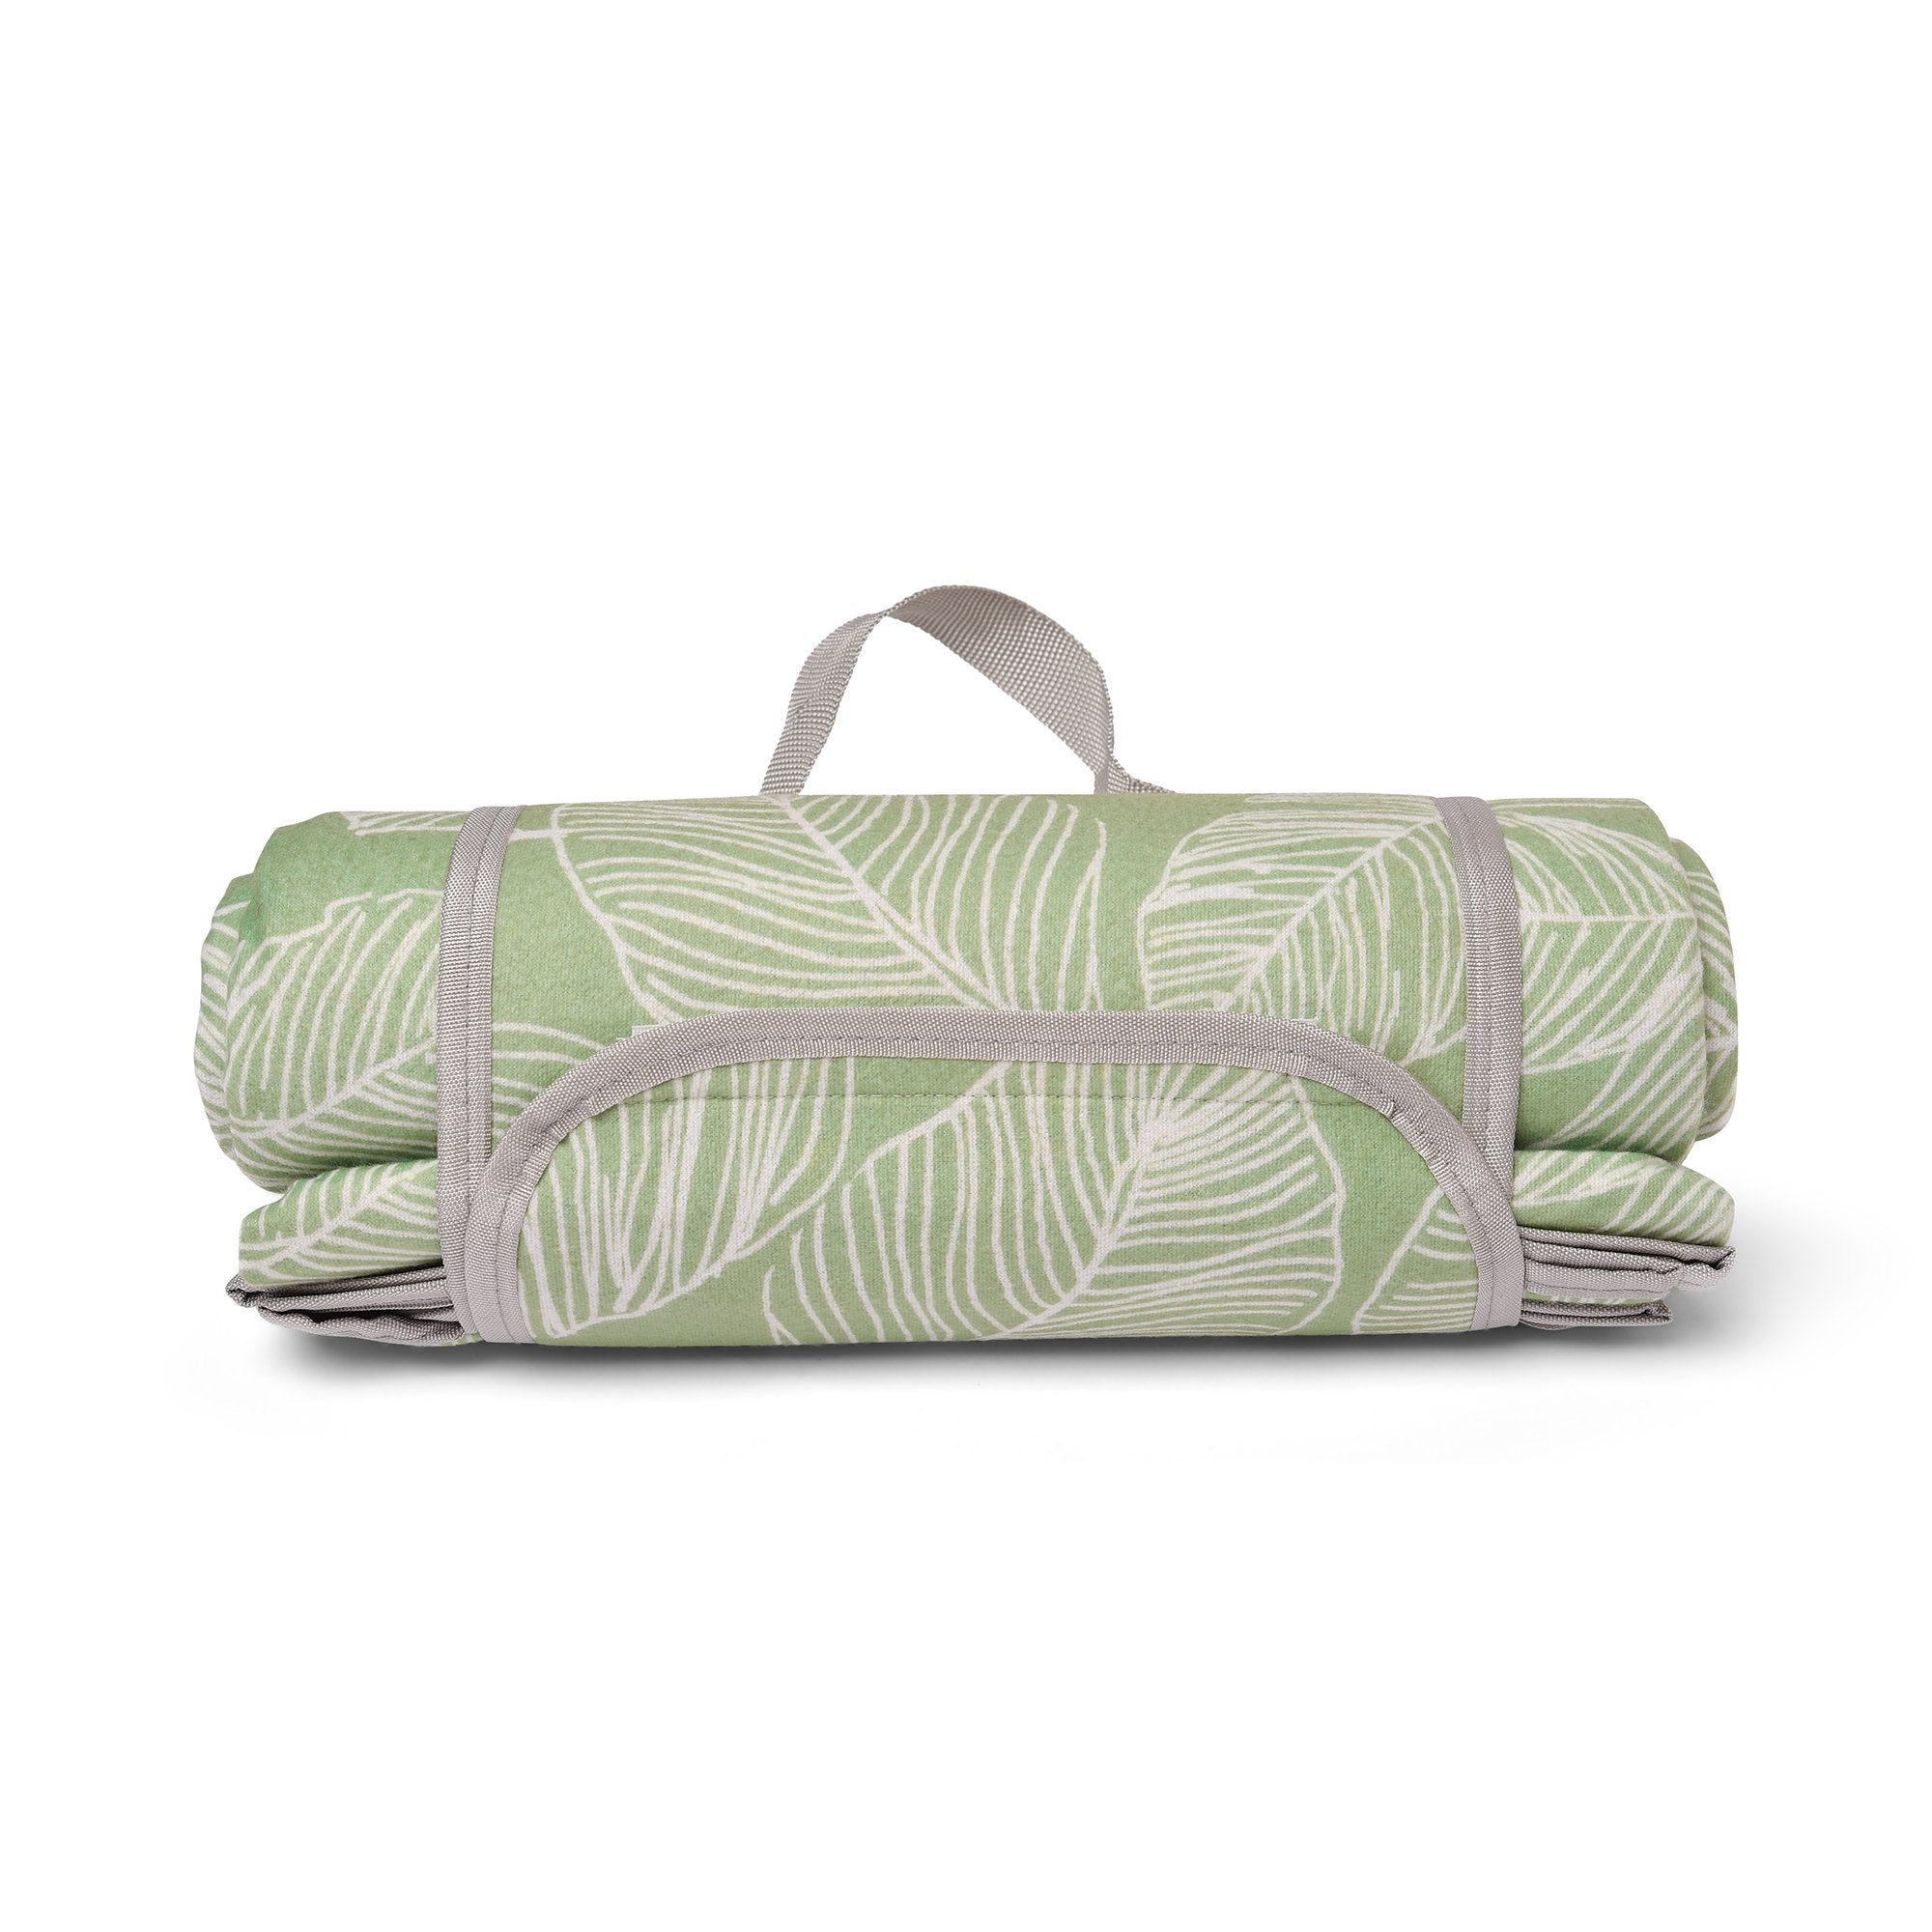 Picnic Blanket Matteo by Fusion in Green